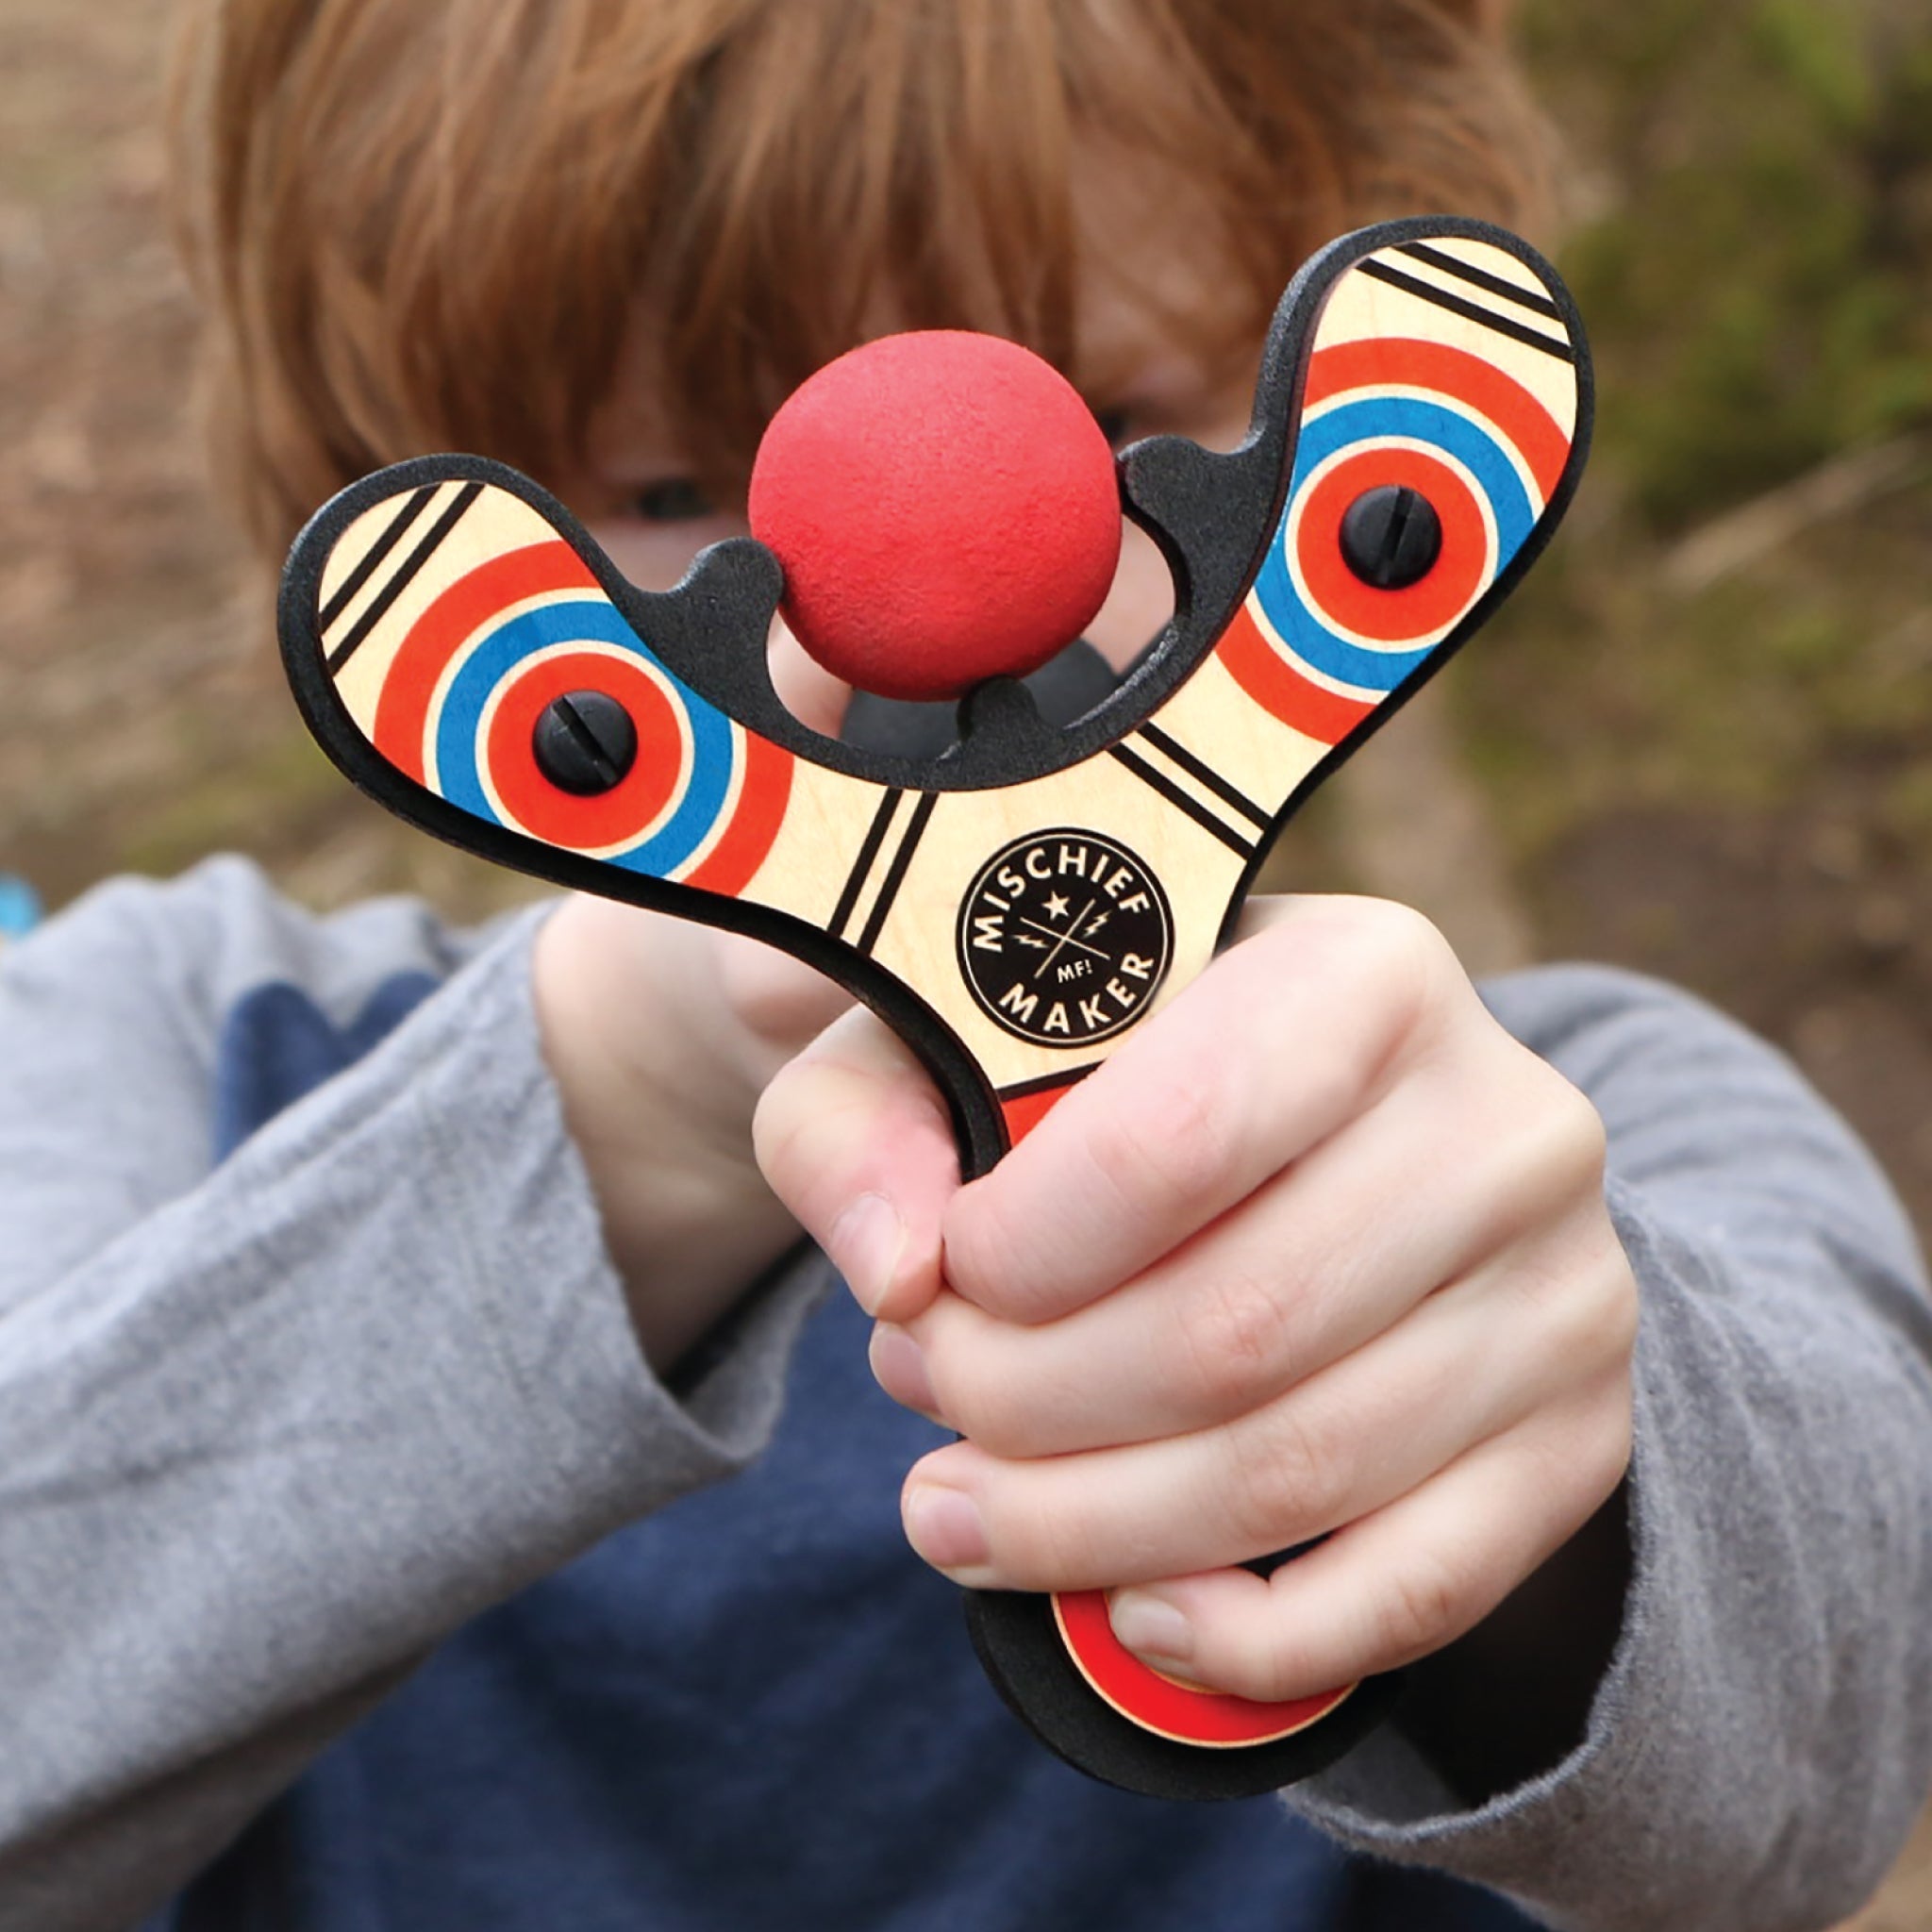 Red Classic wood slingshot being shot by 8 year old boy. Mischief Maker by Mighty Fun!